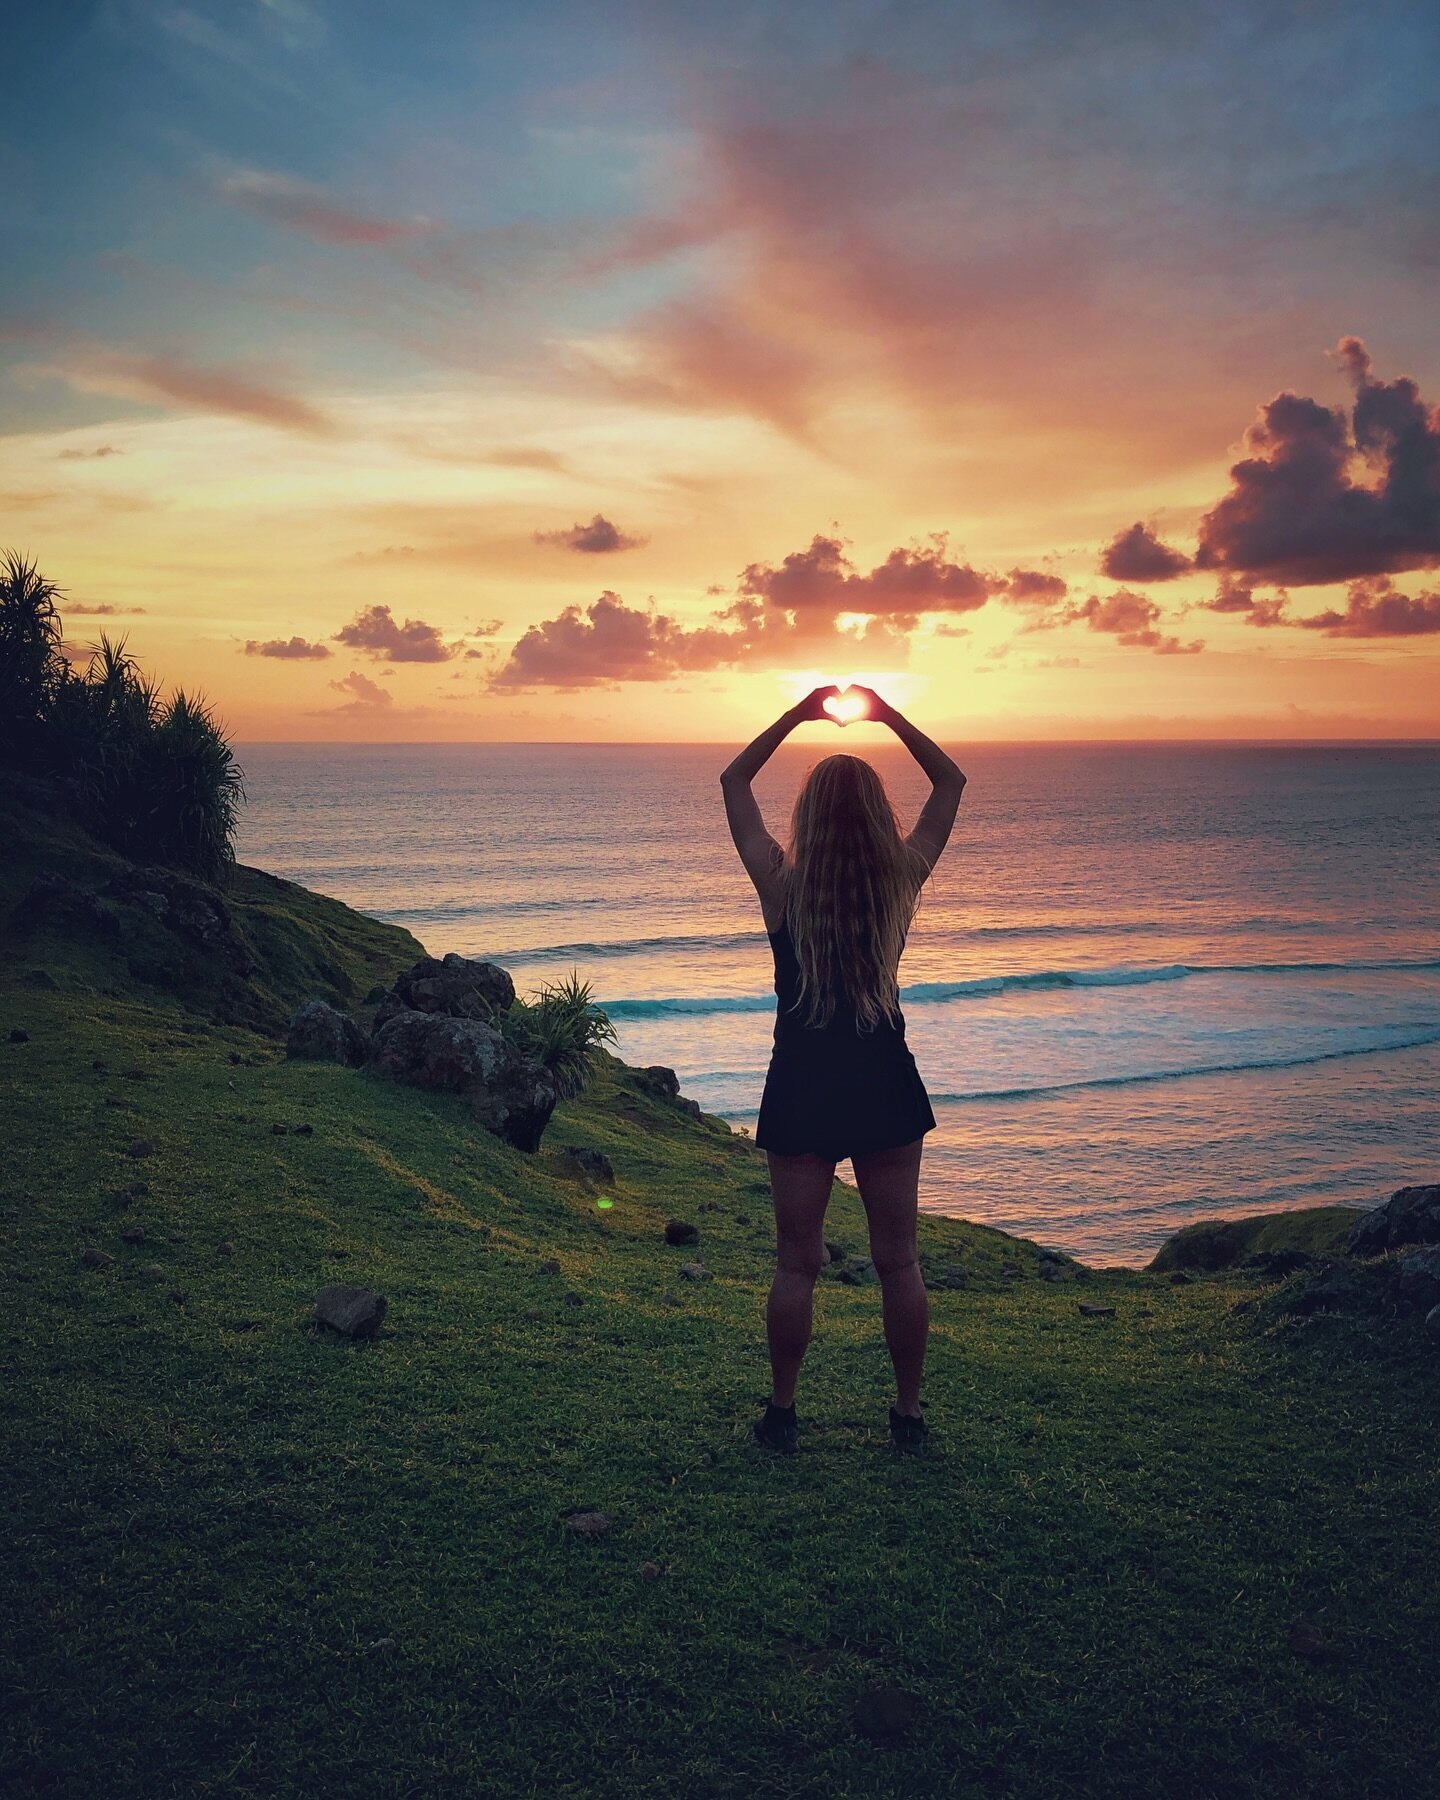 We all deserve freedom, love, health, peace &amp; happiness. It is our birthright.💓
.
.
.
#spreadlove #weareone #freedom #love #happiness #sunsetvibes #yogaretreats #courage #compassion #onelove #collectiveconsciousness #oneworld #goodvibes